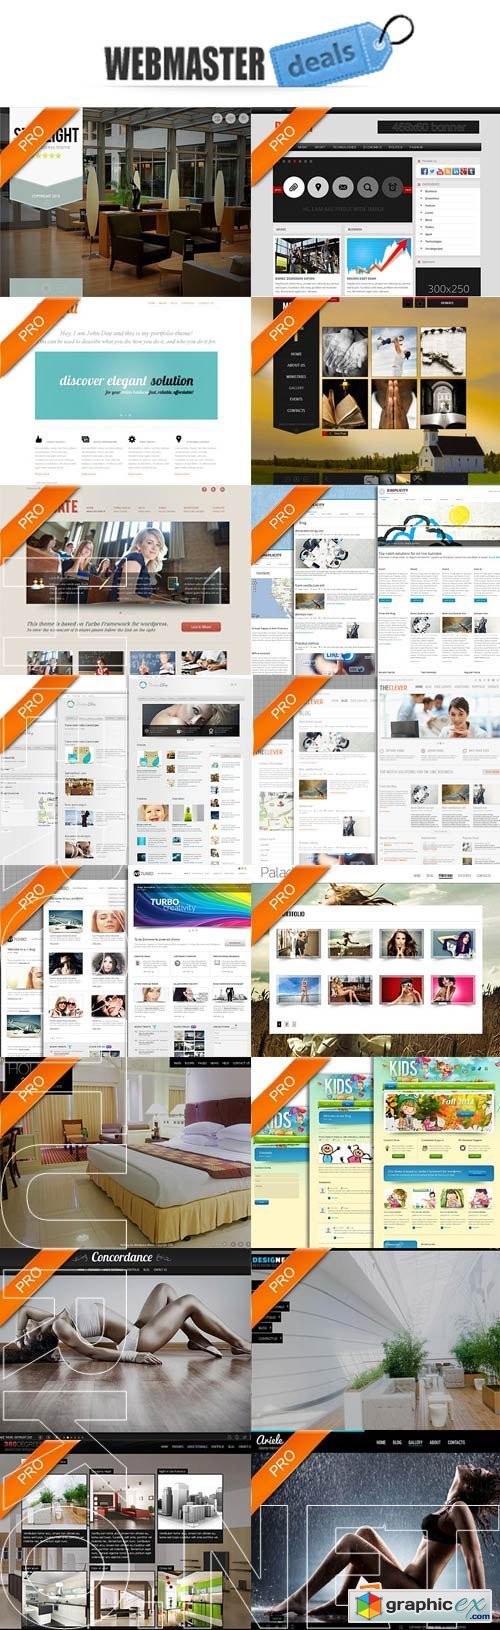 Webmaster-Deals - 17 Awesome Wordpress Themes